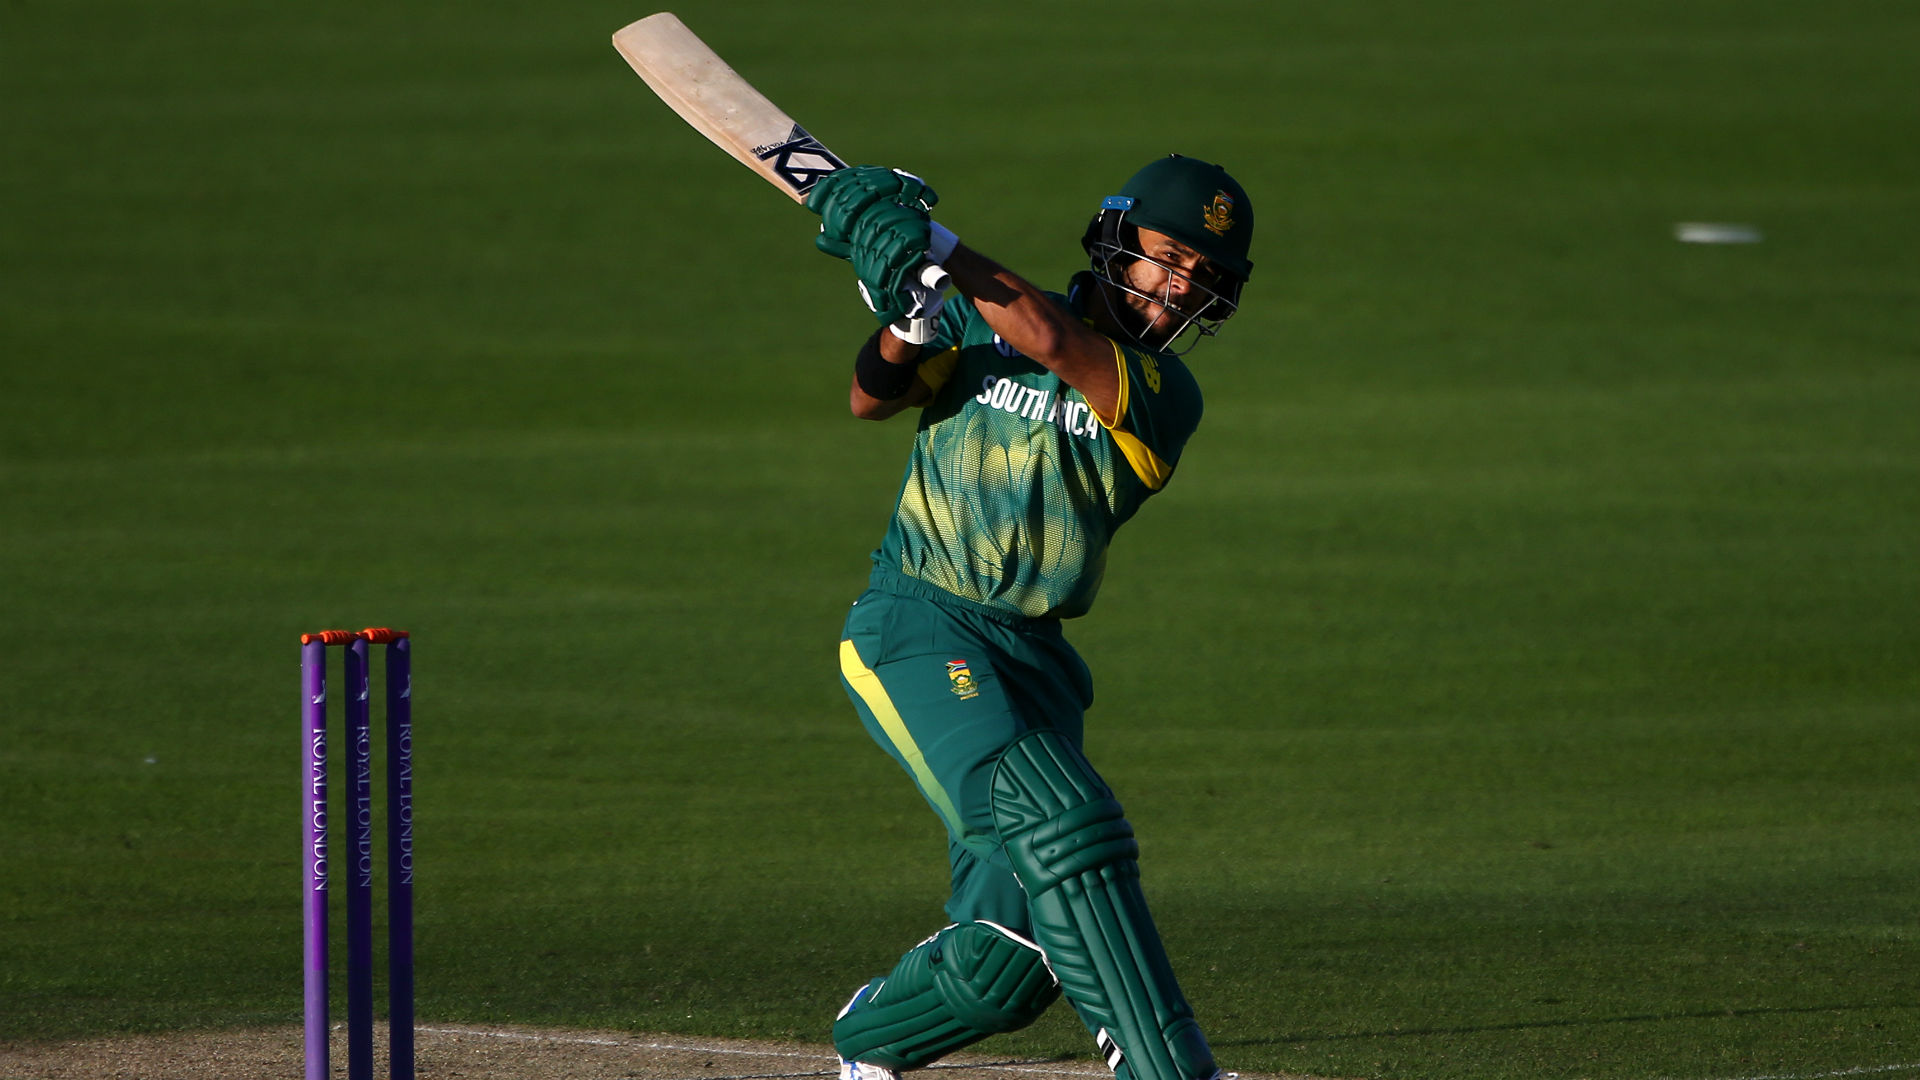 All-rounder JP Duminy will play his final ODI in South Africa against Sri Lanka at Newlands on Saturday.